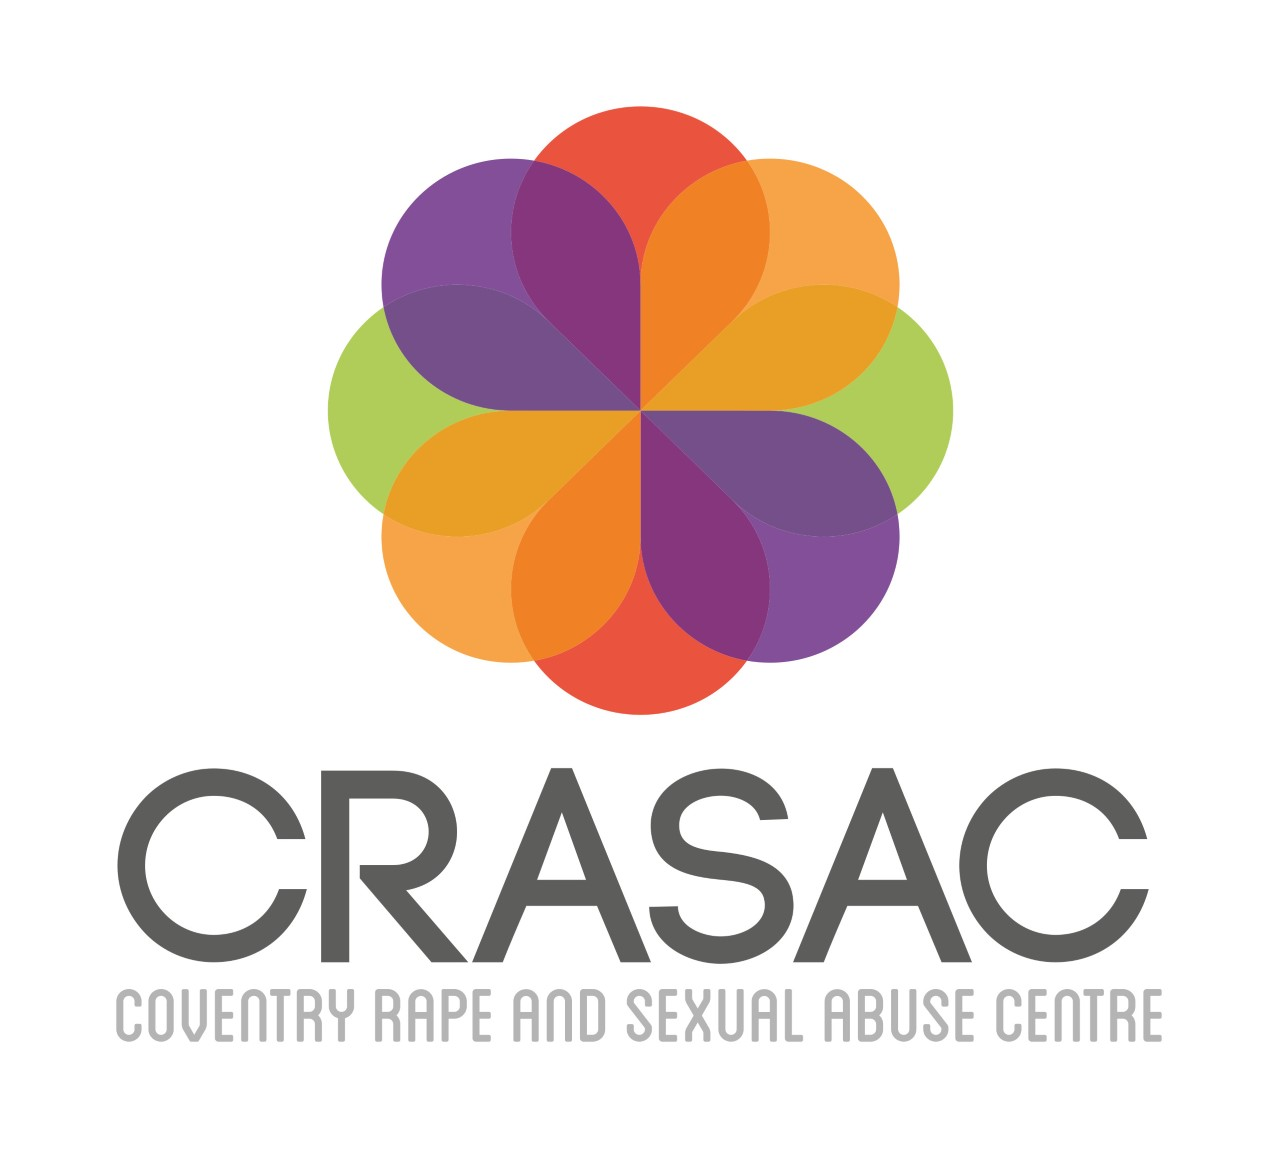 CRASAC, sexual abuse charity